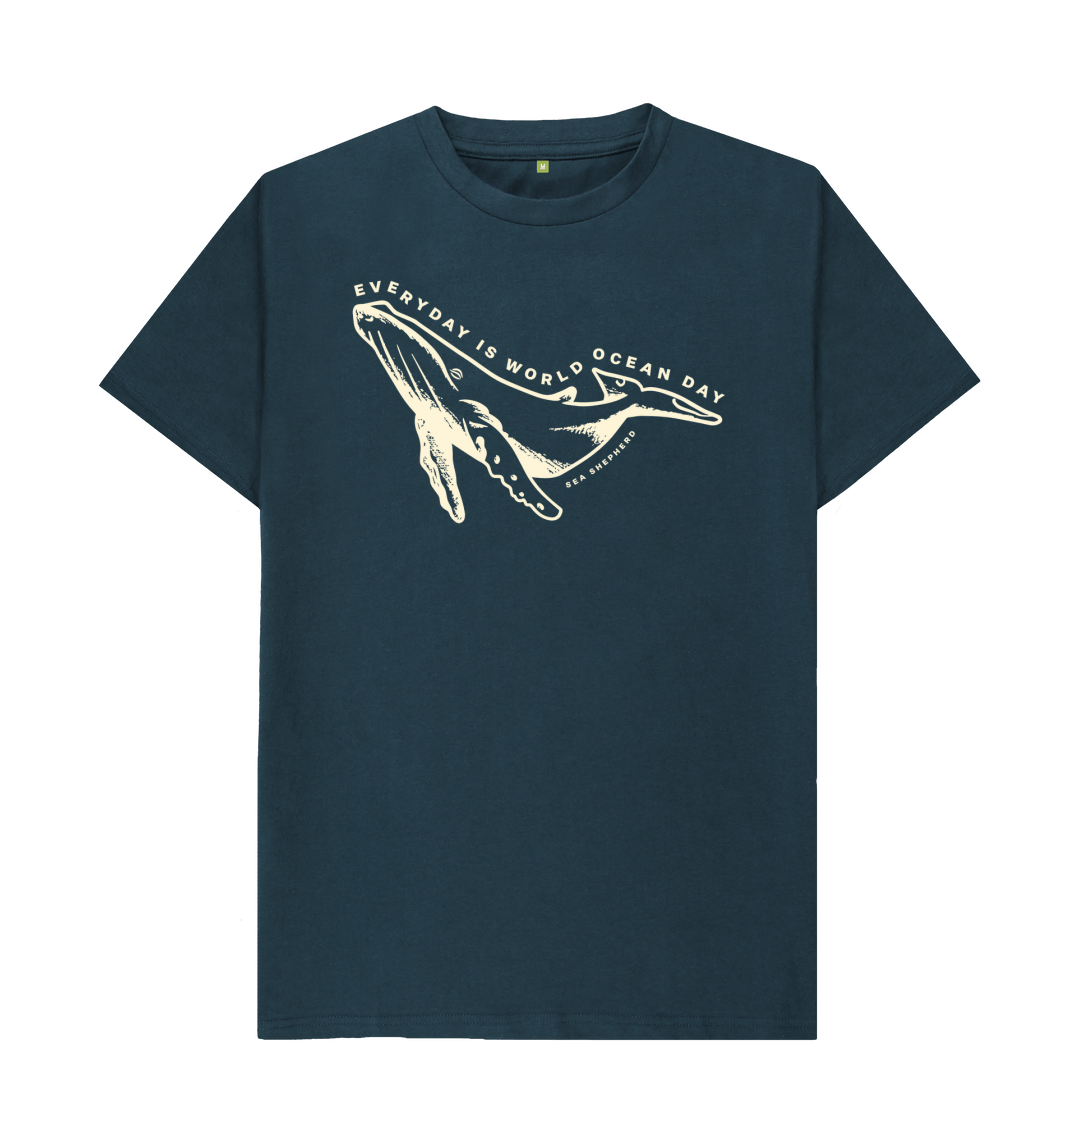 Everyday is World Ocean Day T-shirt